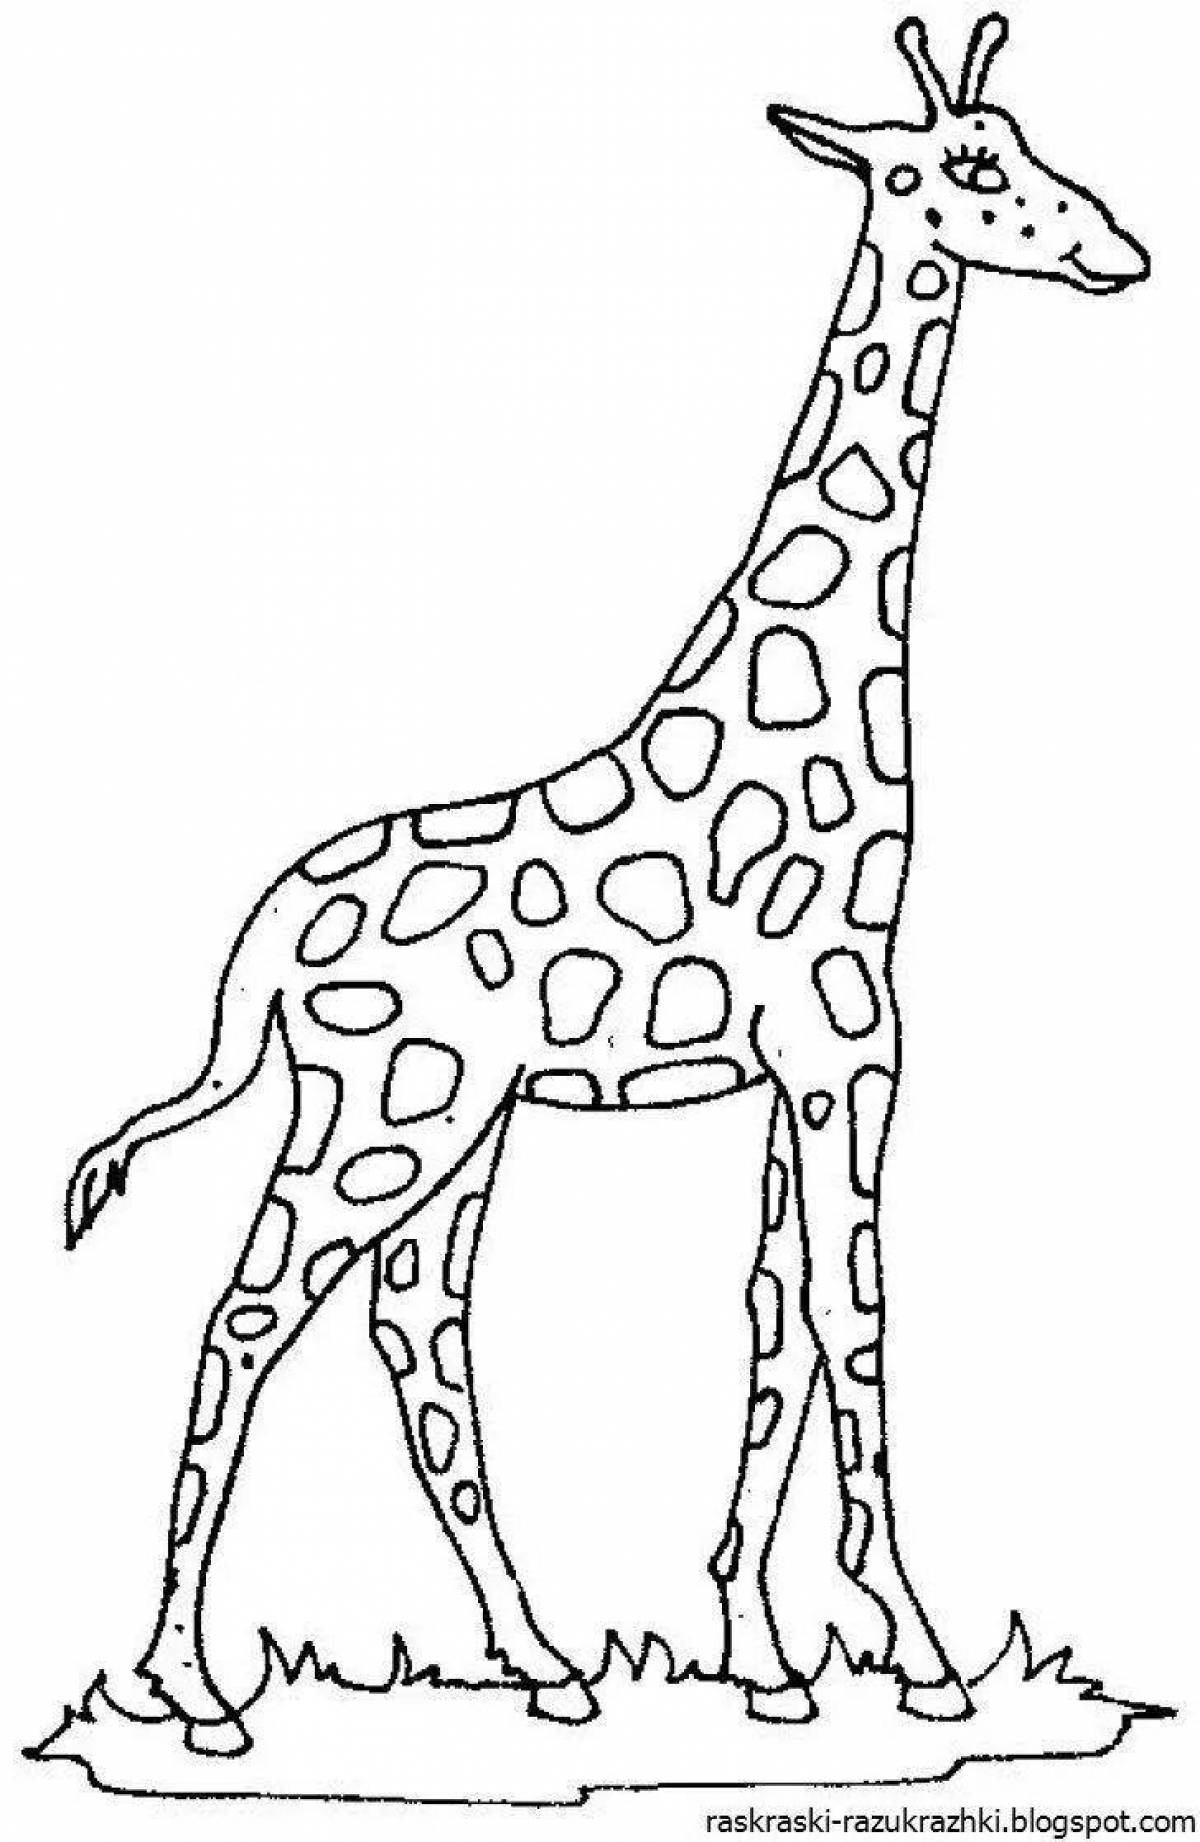 Colorful giraffe coloring book for kids